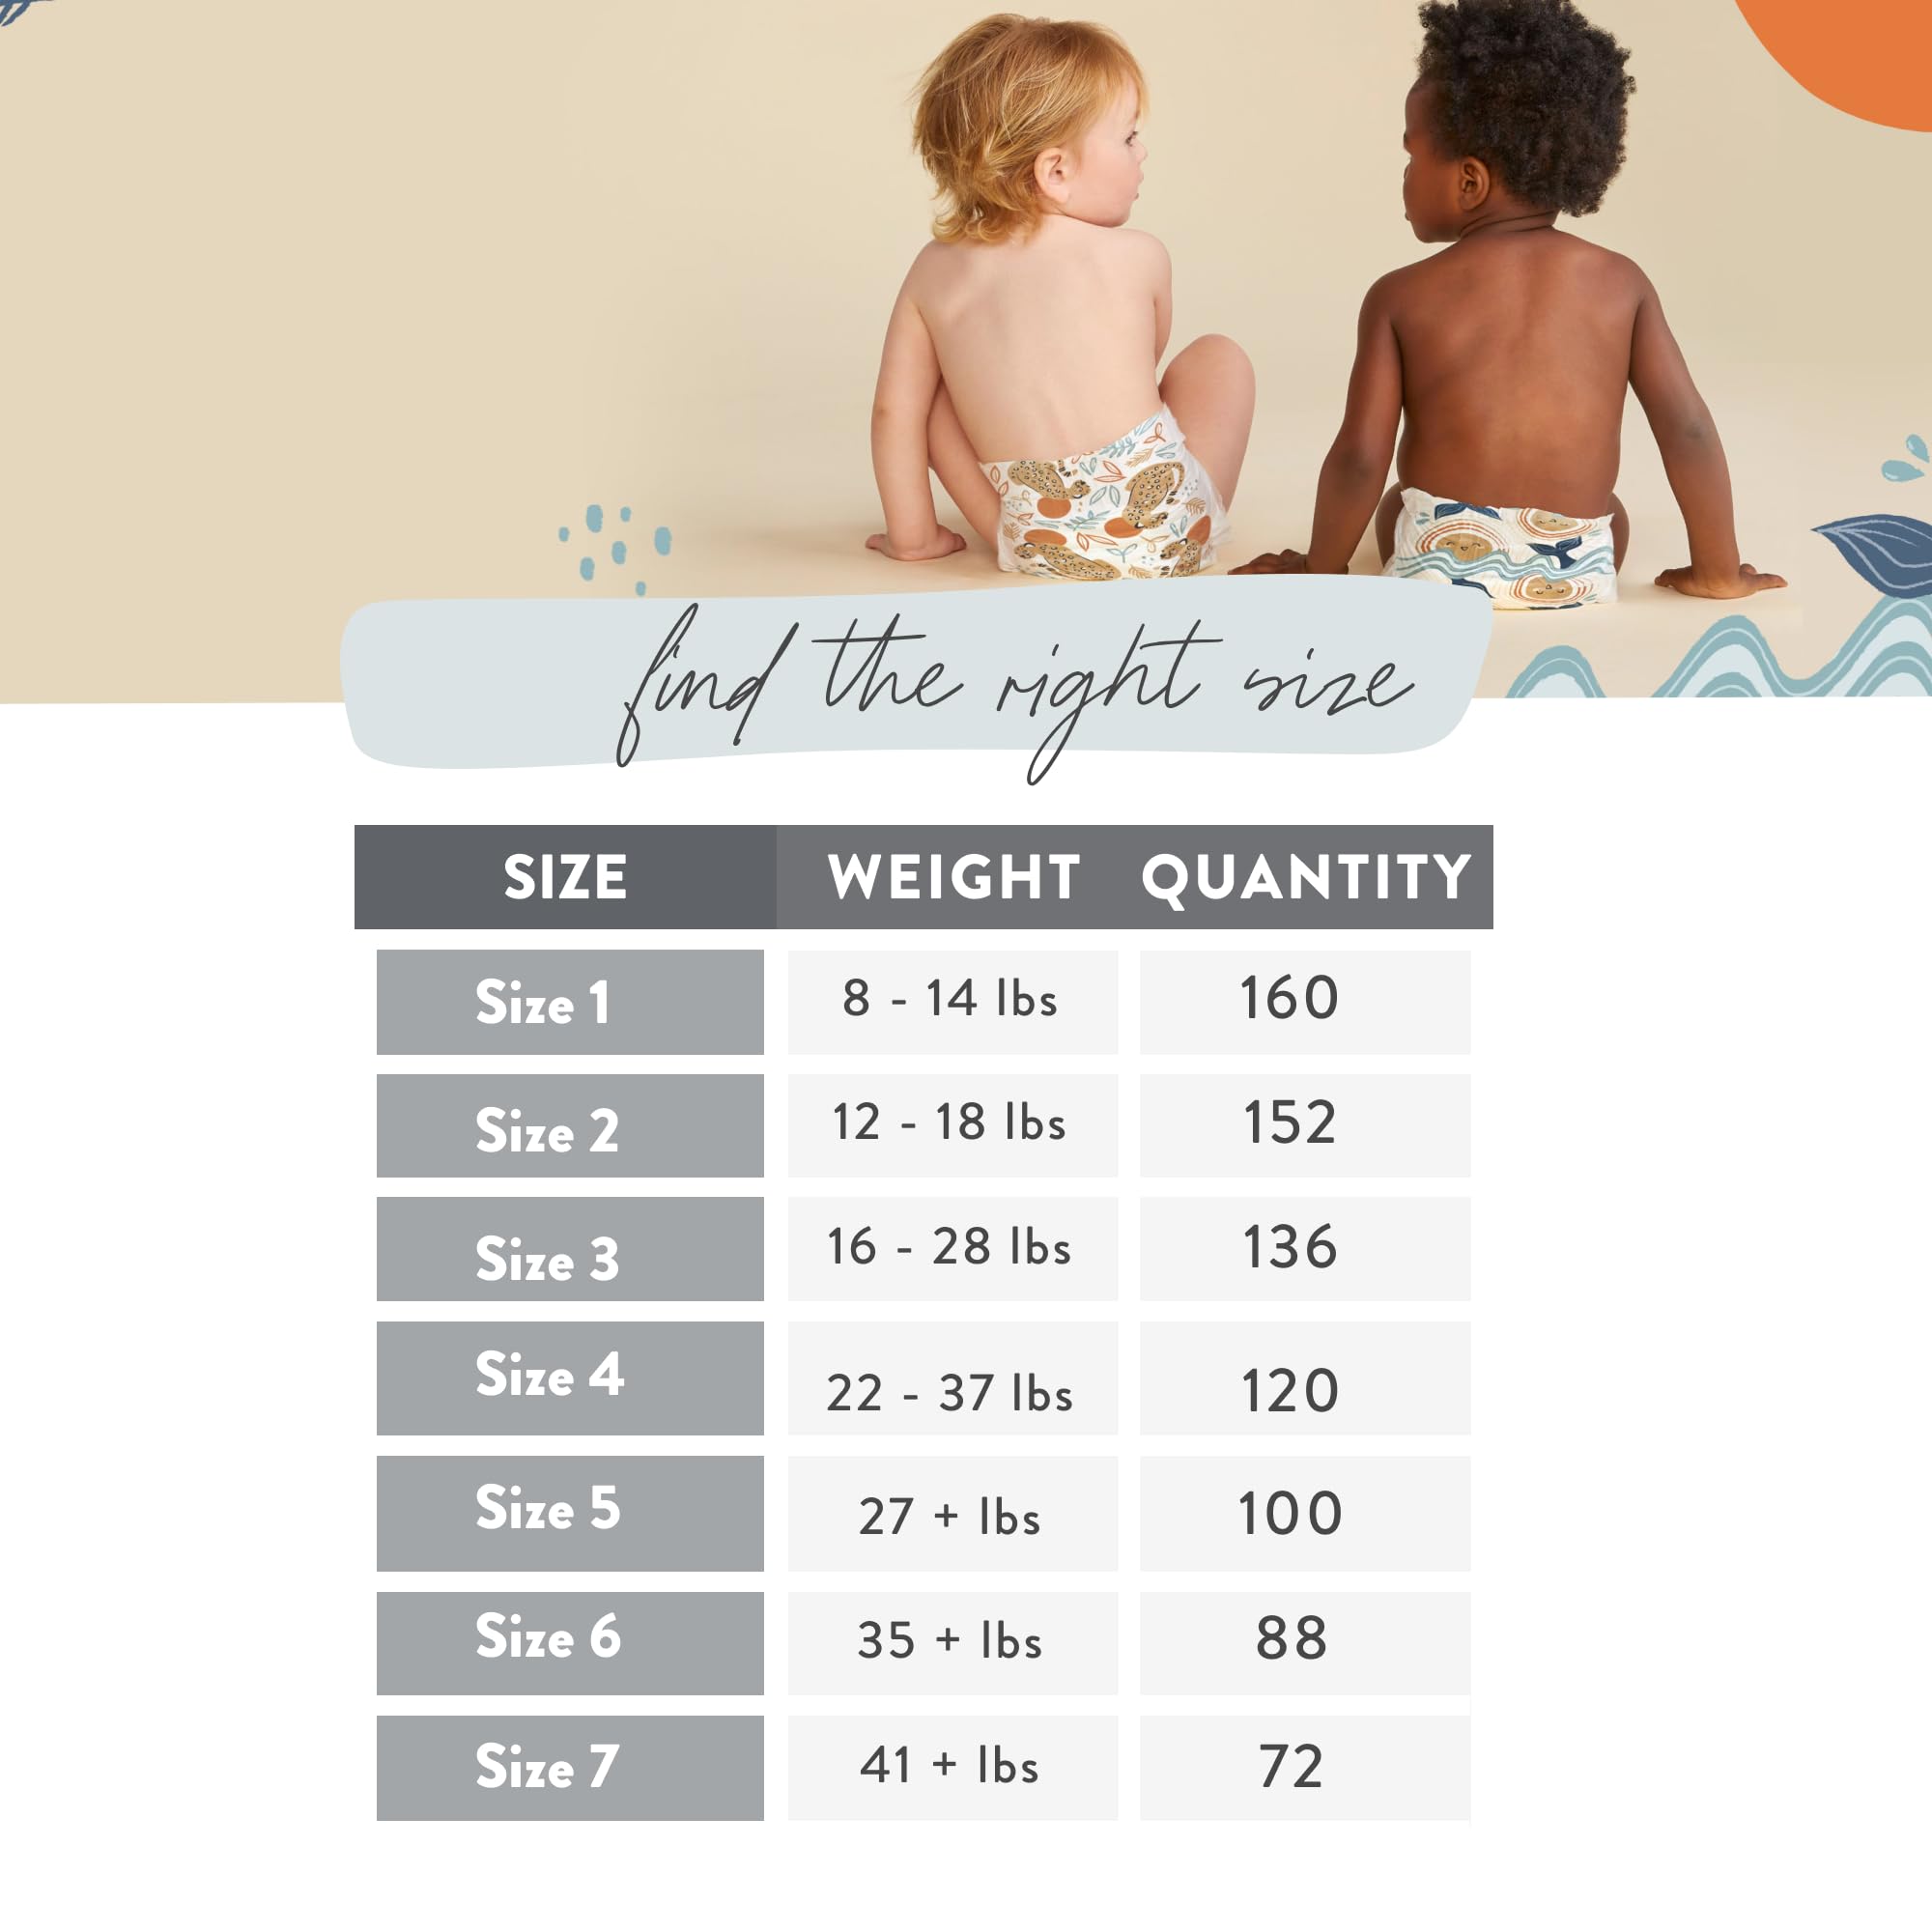 The Honest Company Clean Conscious Diapers | Plant-Based, Sustainable | Rose Blossom + Tutu Cute | Super Club Box, Size 1 (8-14 lbs), 160 Count